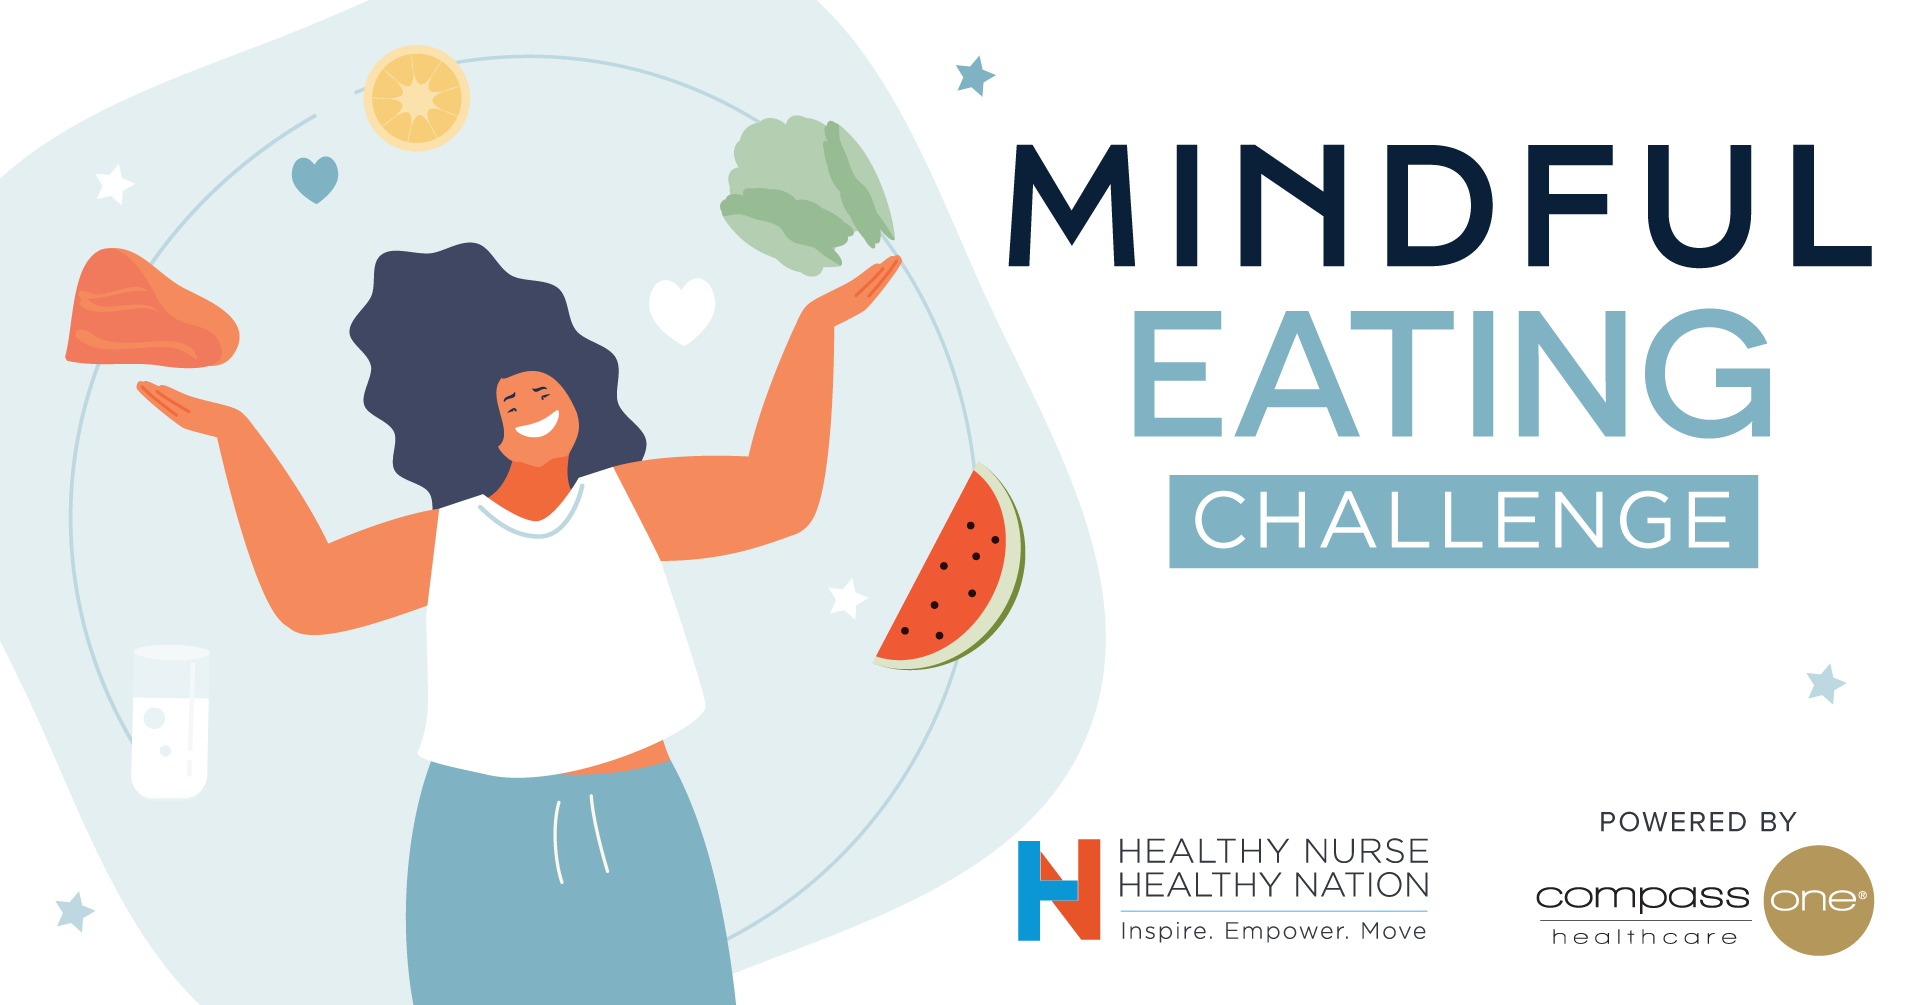 Become Portion Proficient - Mindful Eating, powered by Morrison Healthcare, a Division of Compass One Healthcare - Day 9 Tip 4699